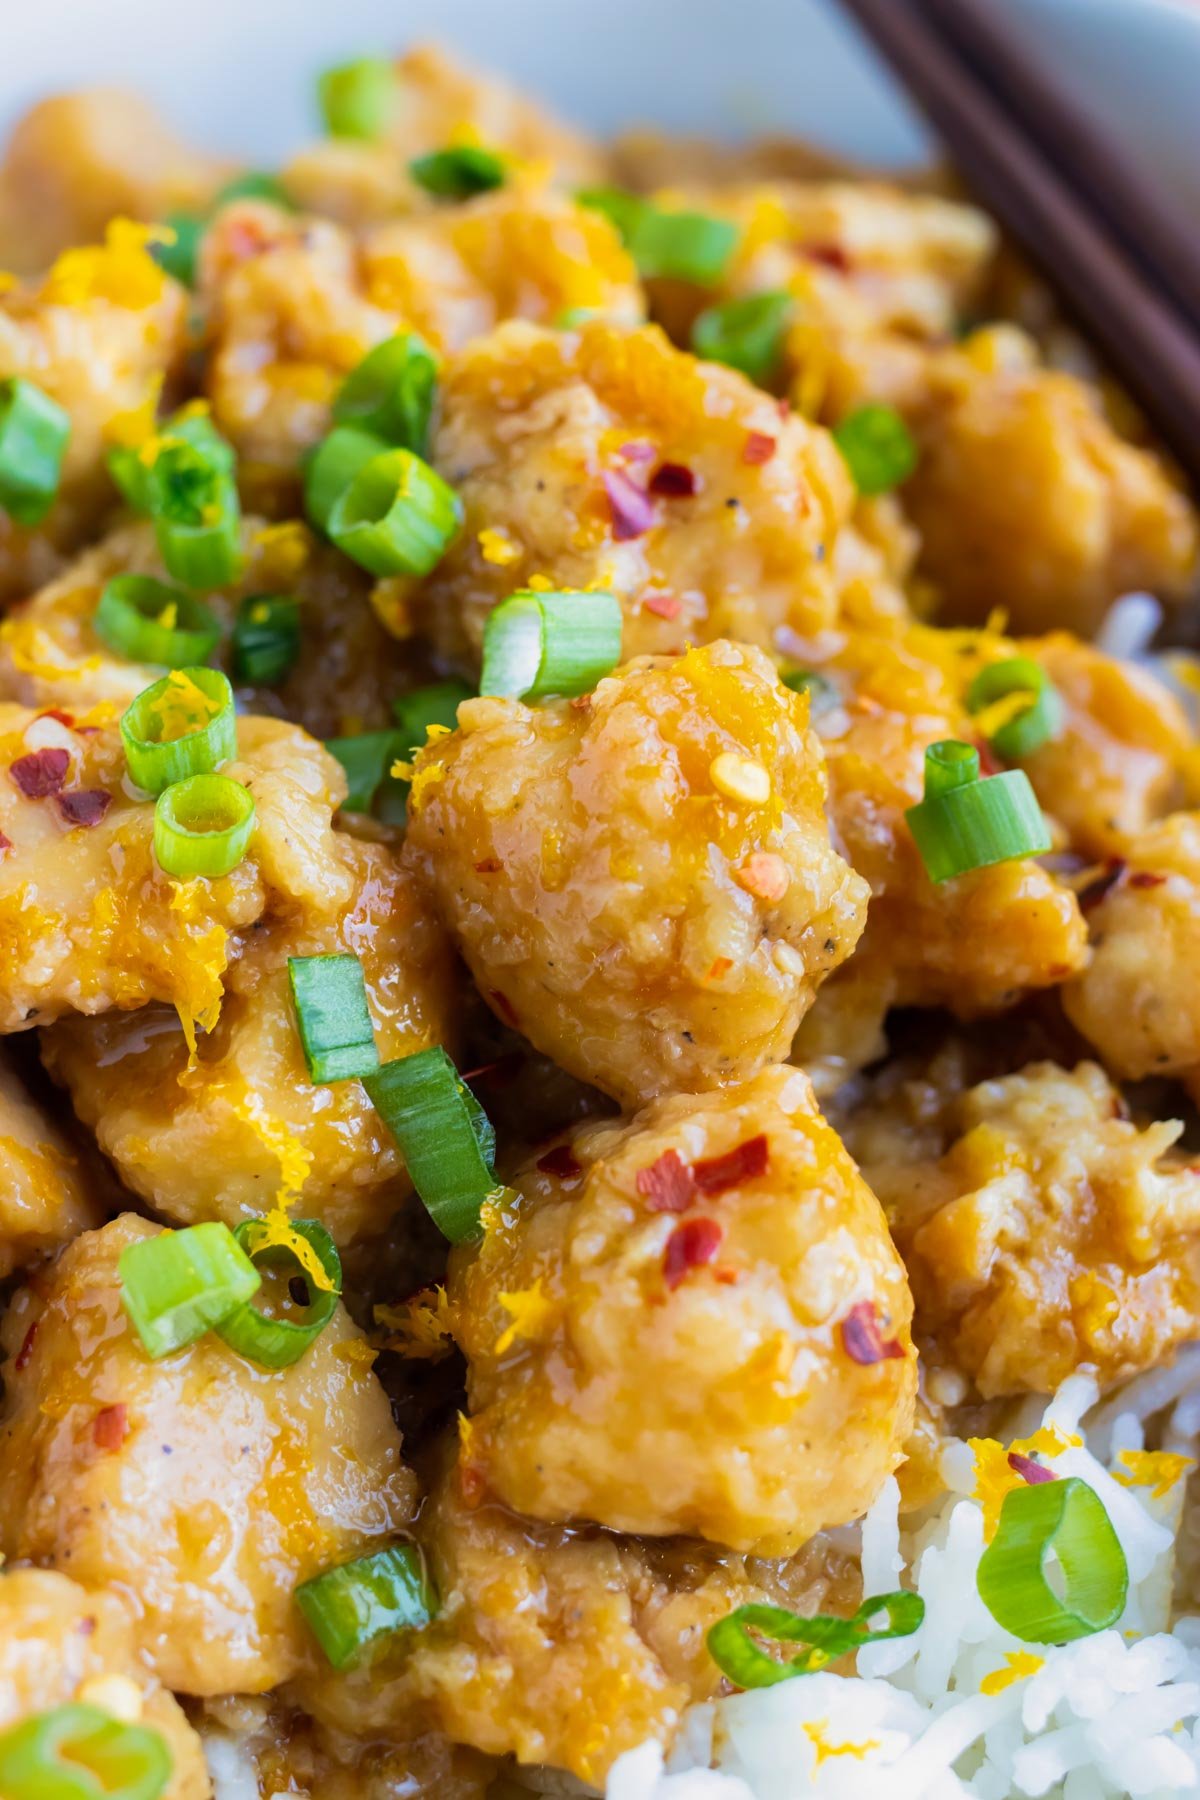 Gluten-free orange chicken that is quick and easy to make in the Instant Pot.